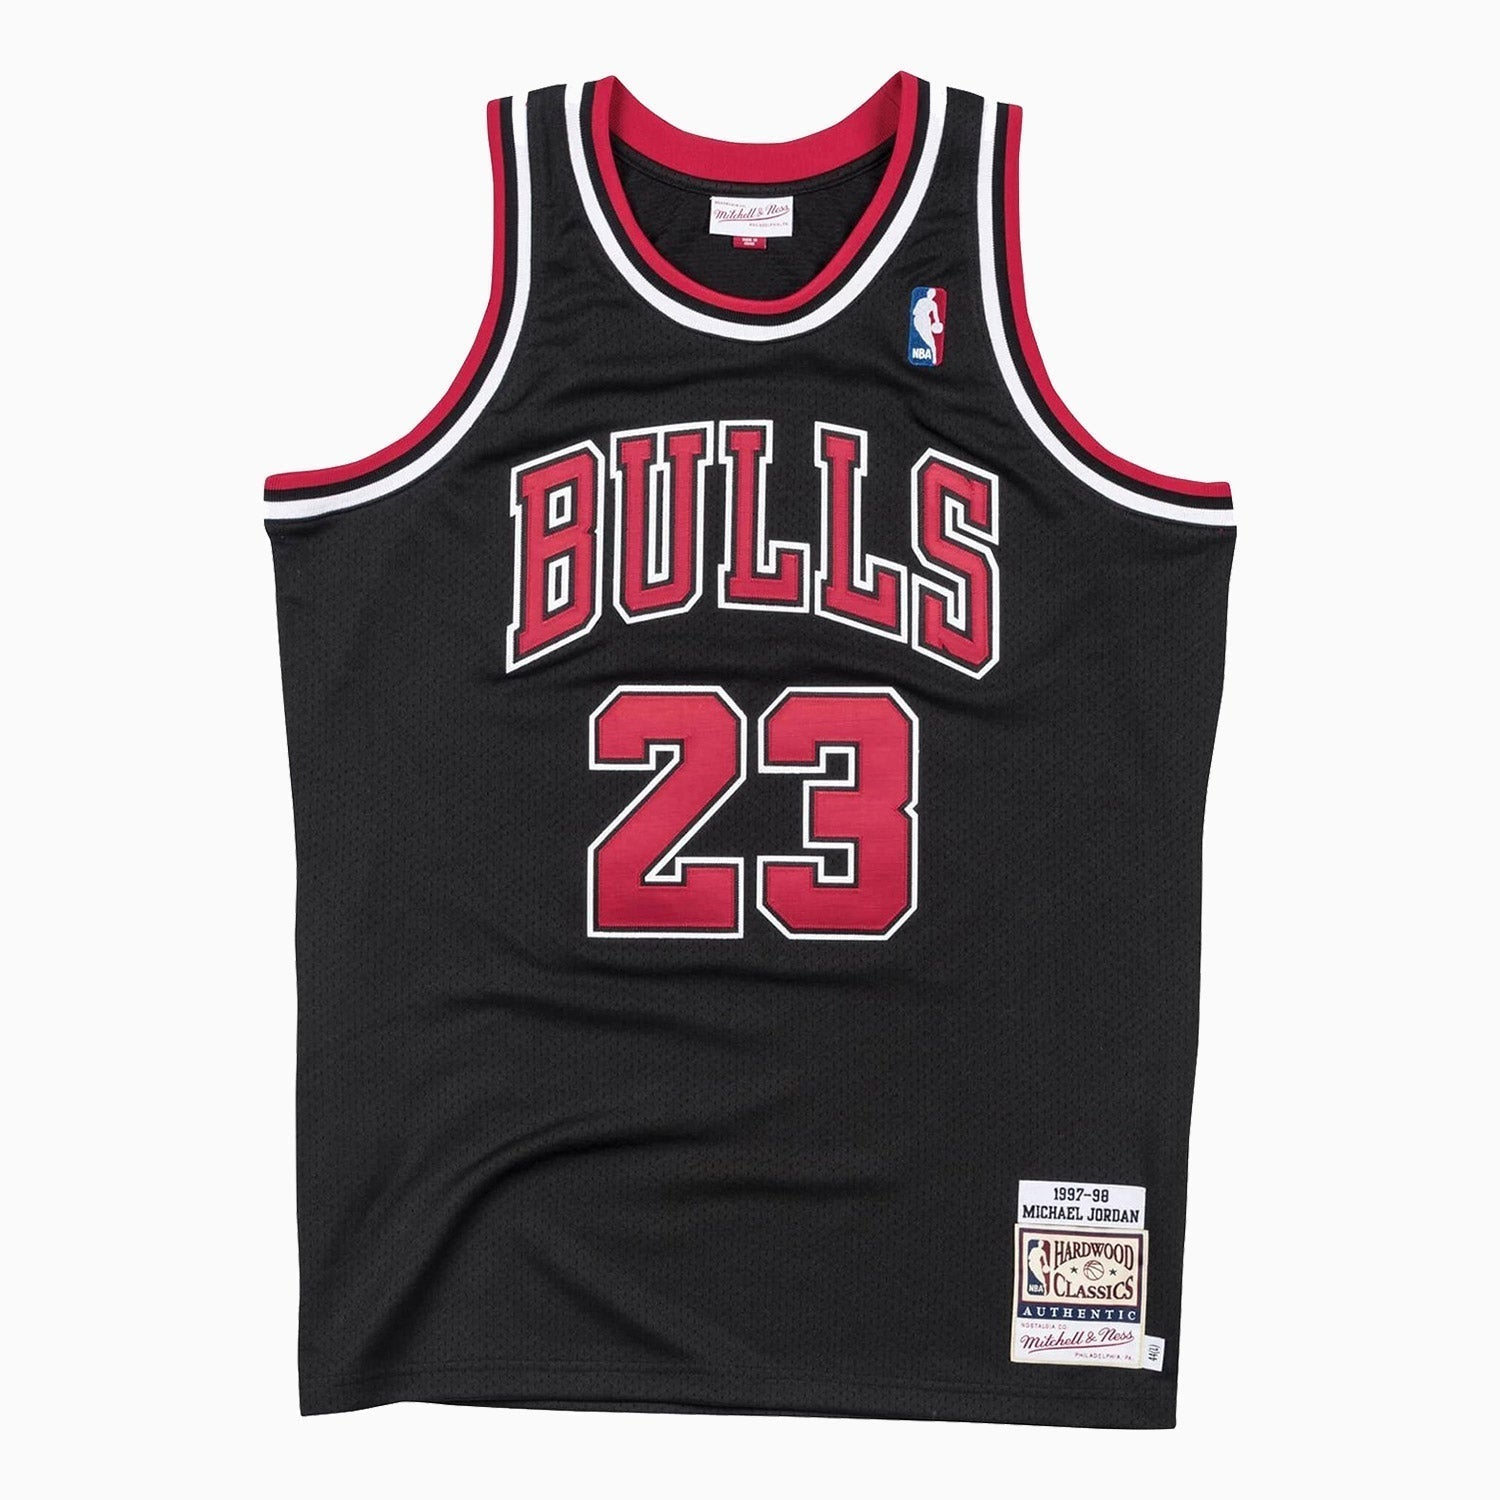 mitchell-and-ness-authentic-michael-jordan-chicago-bulls-nba-1997-98-jersey-ajy4gs18400-cbublck97mjo